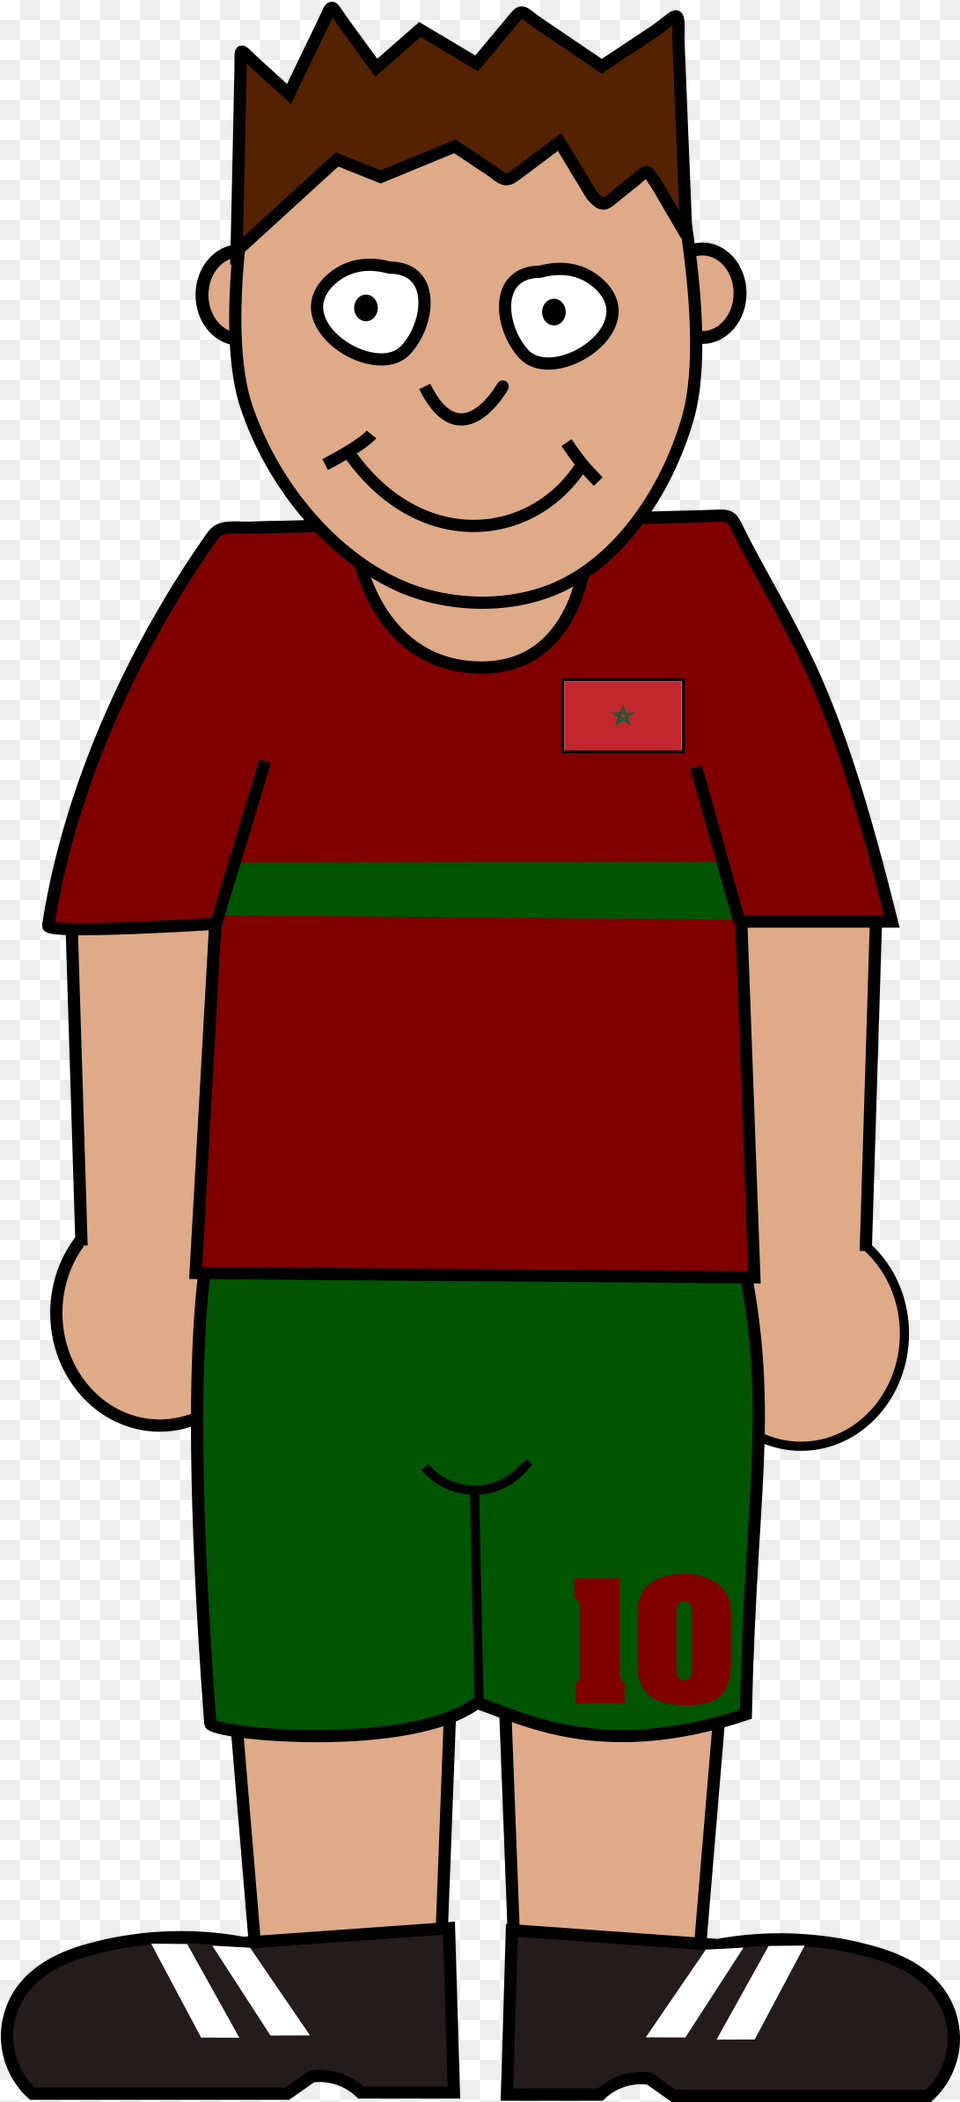 Download Hd Big World Cup Soccer Player Clipart Costa Rican People Clipart, Clothing, Shorts, T-shirt, Baby Png